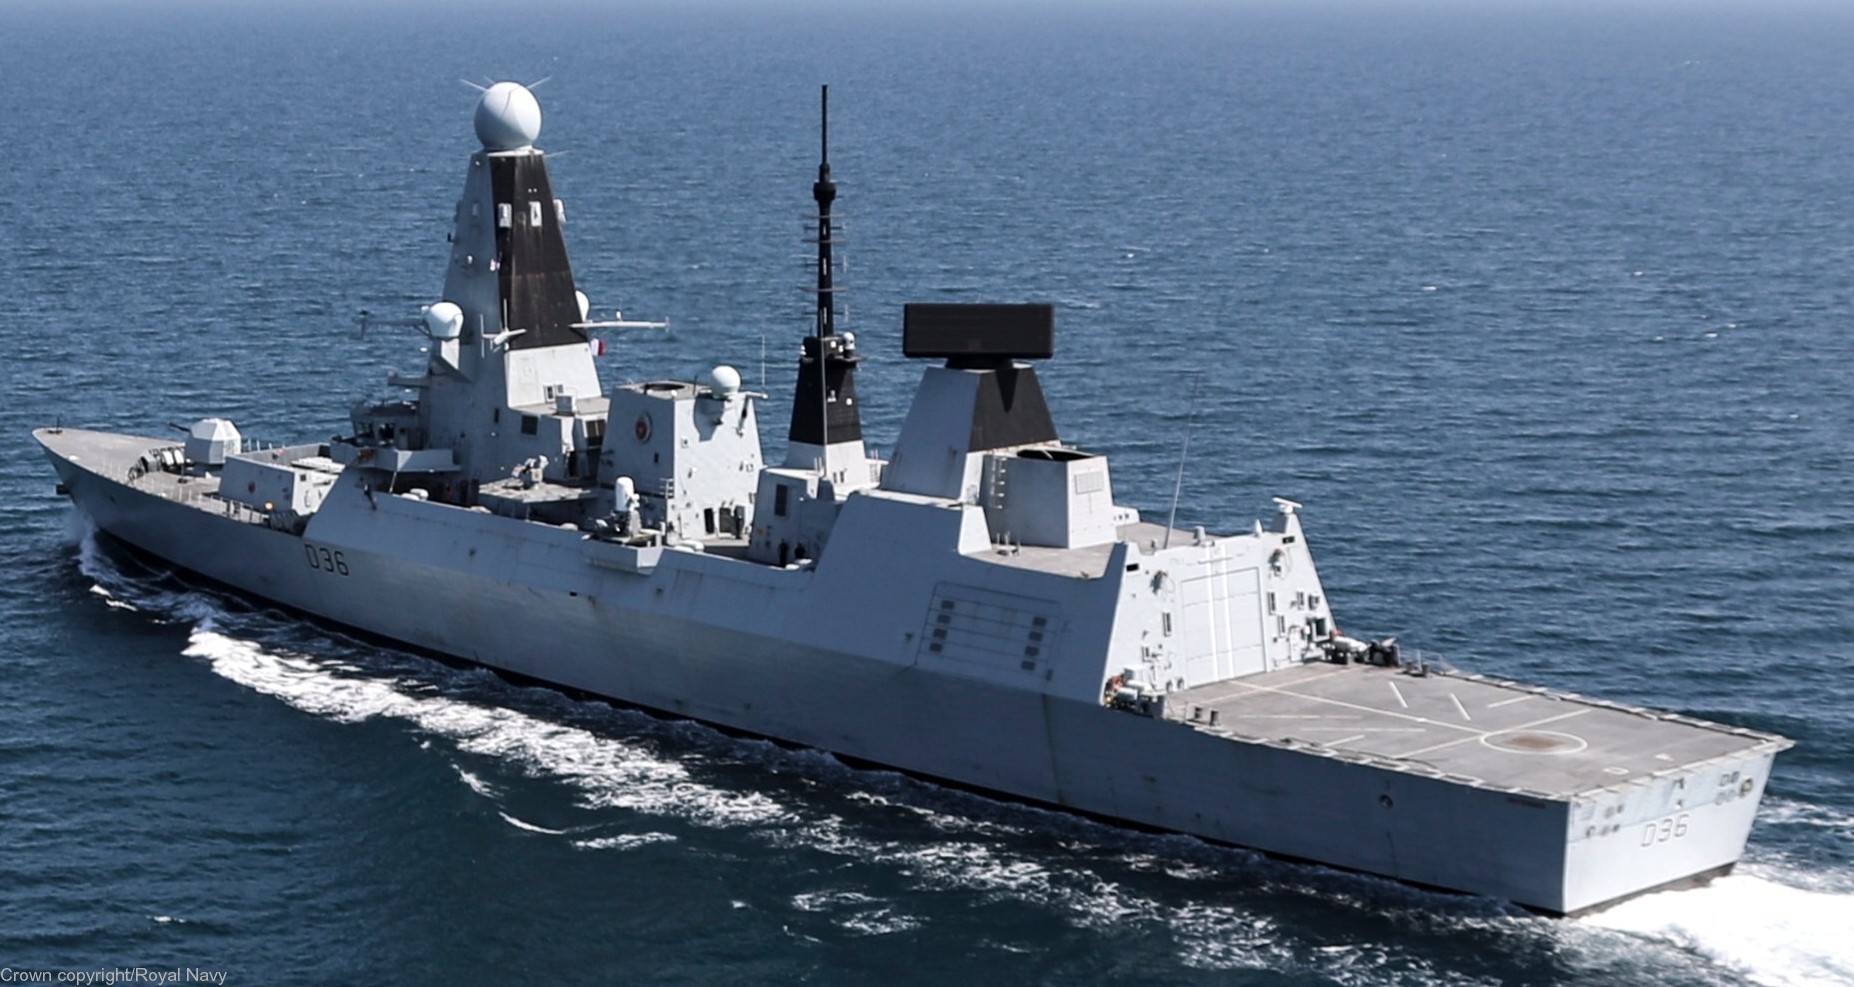 d36 hms defender d-36 type 45 daring class guided missile destroyer ddg royal navy sea viper 21